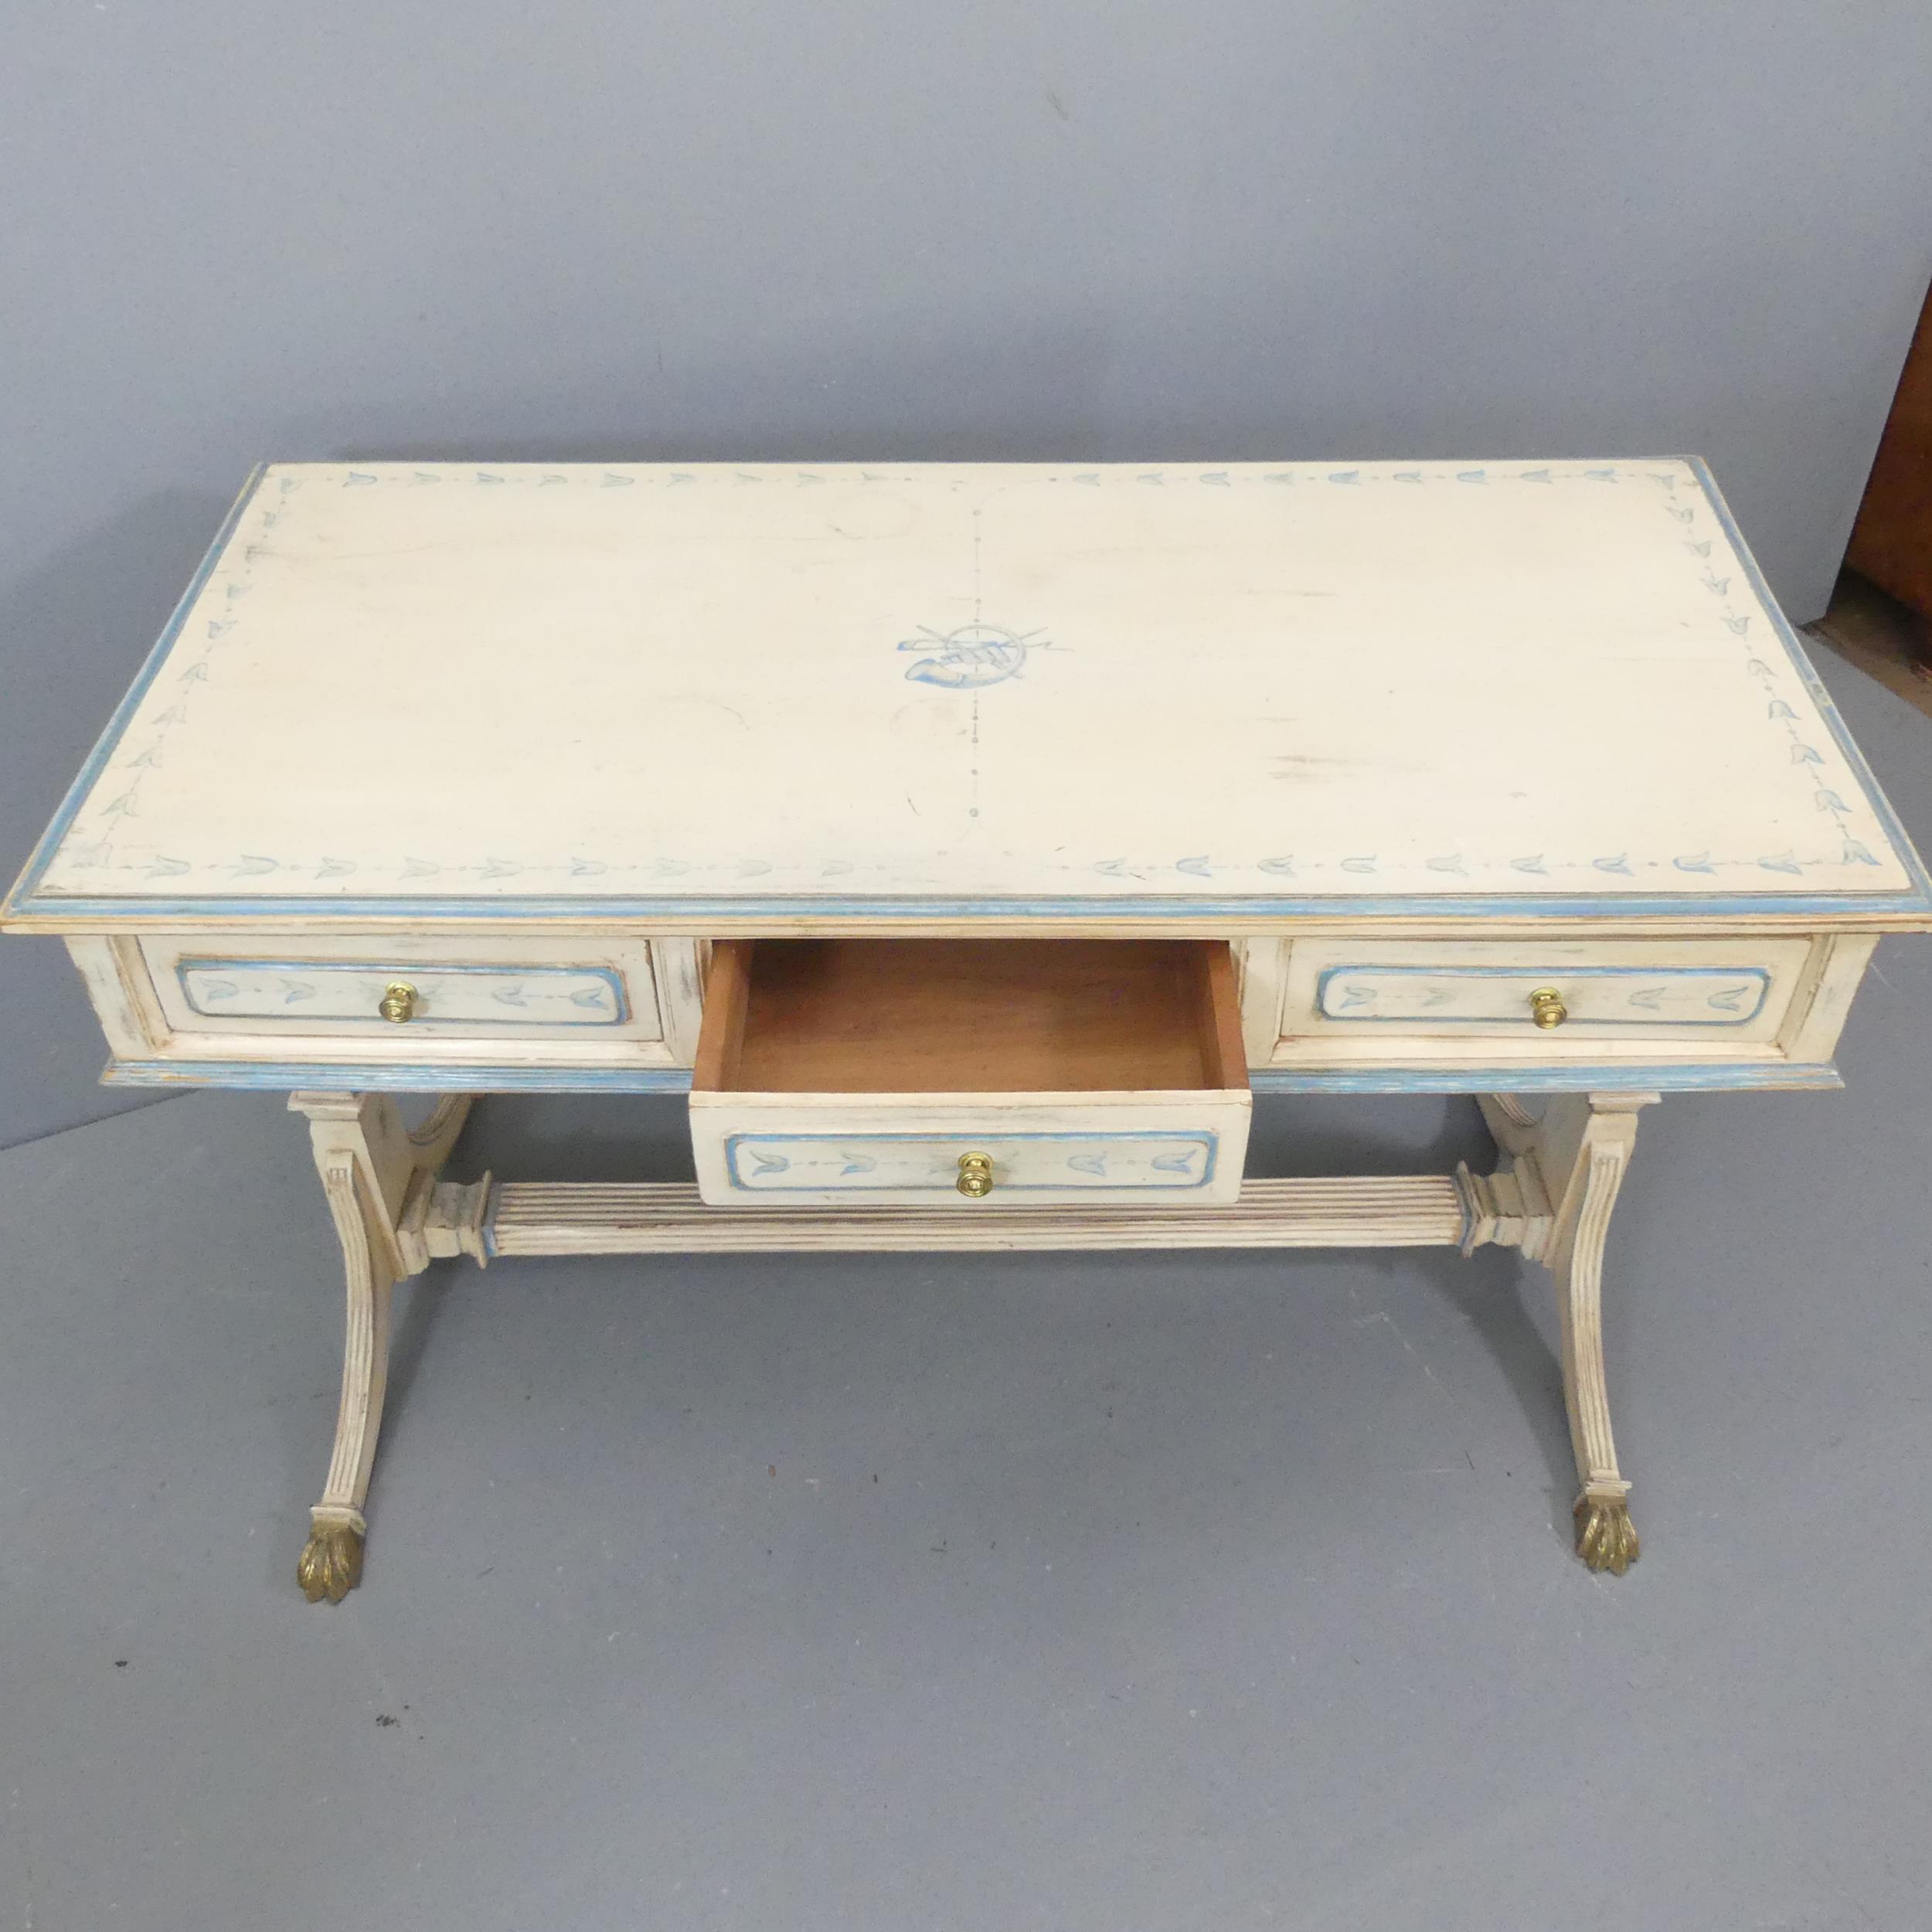 A painted mahogany Regency-style stretcher table, with three drawers and carved decoration. - Image 2 of 2